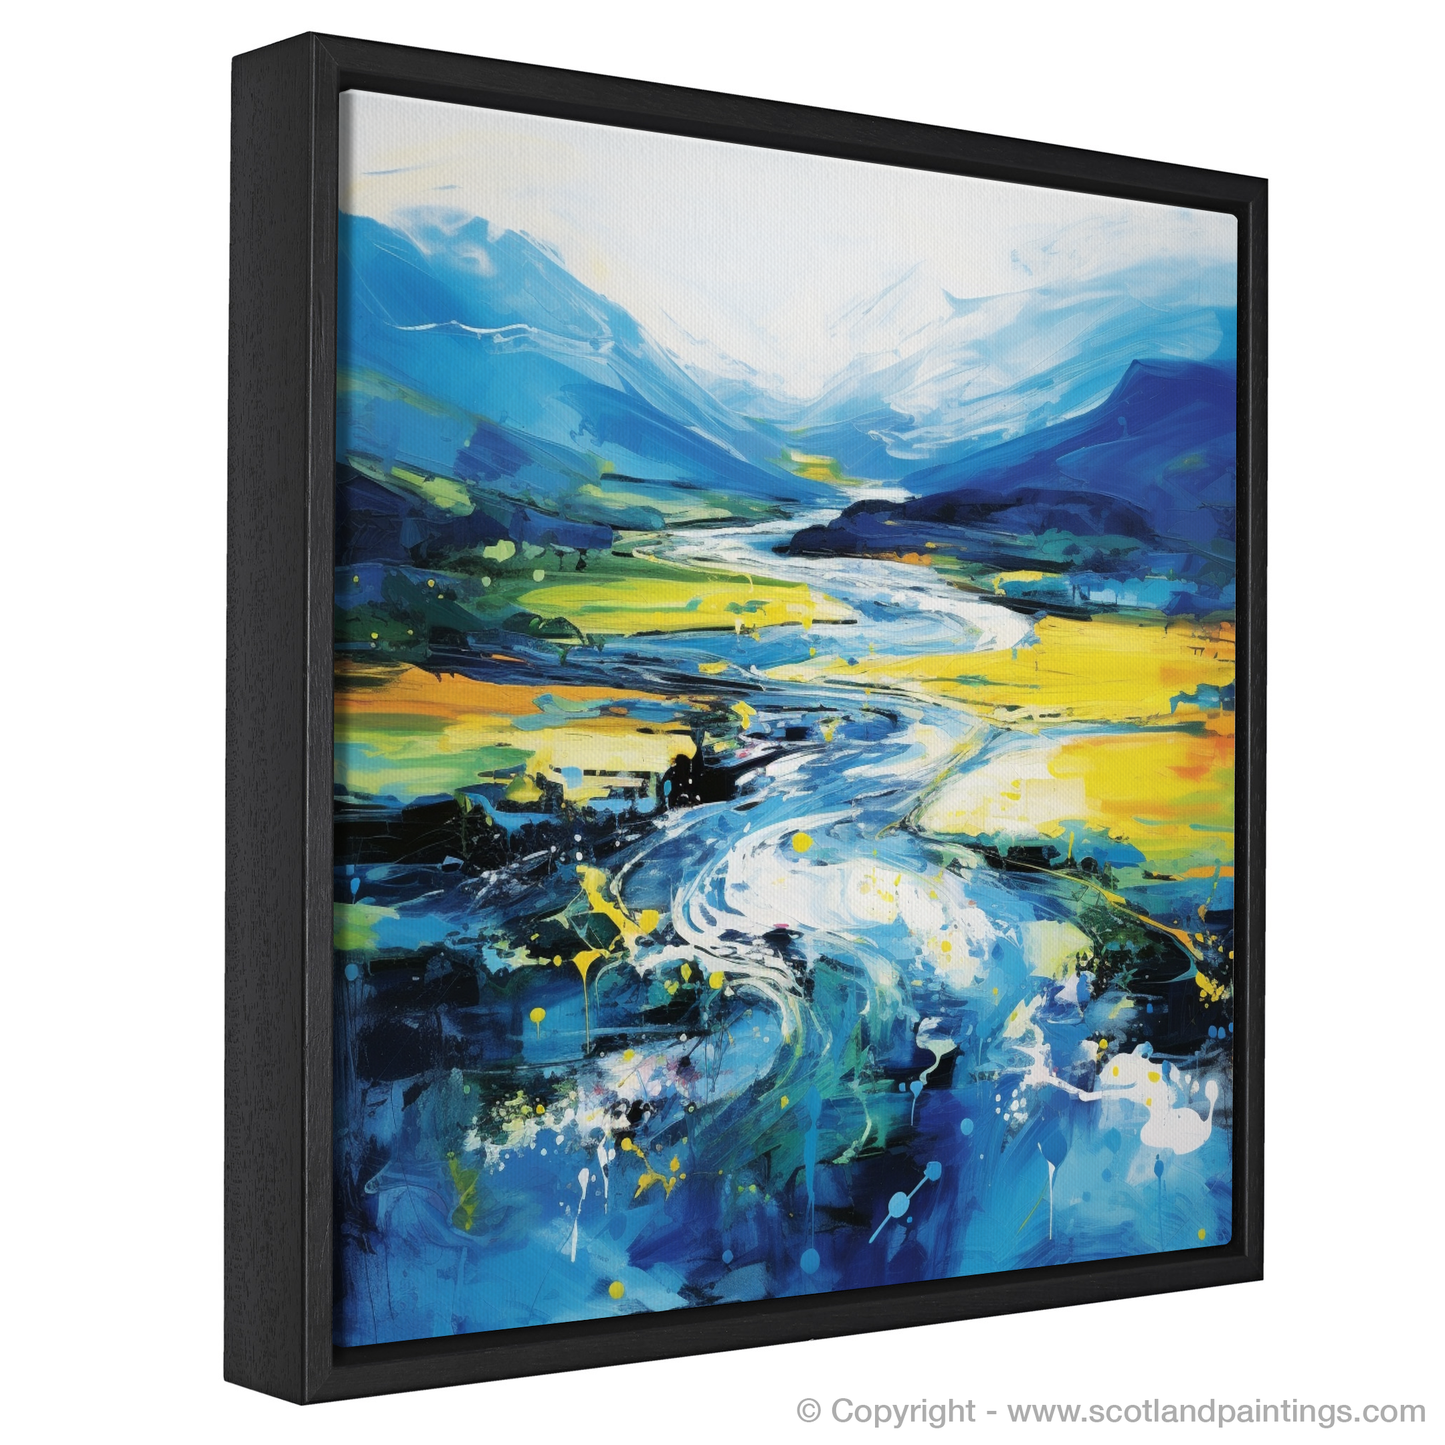 Painting and Art Print of River Orchy, Argyll and Bute in summer entitled "Summer Currents of River Orchy".